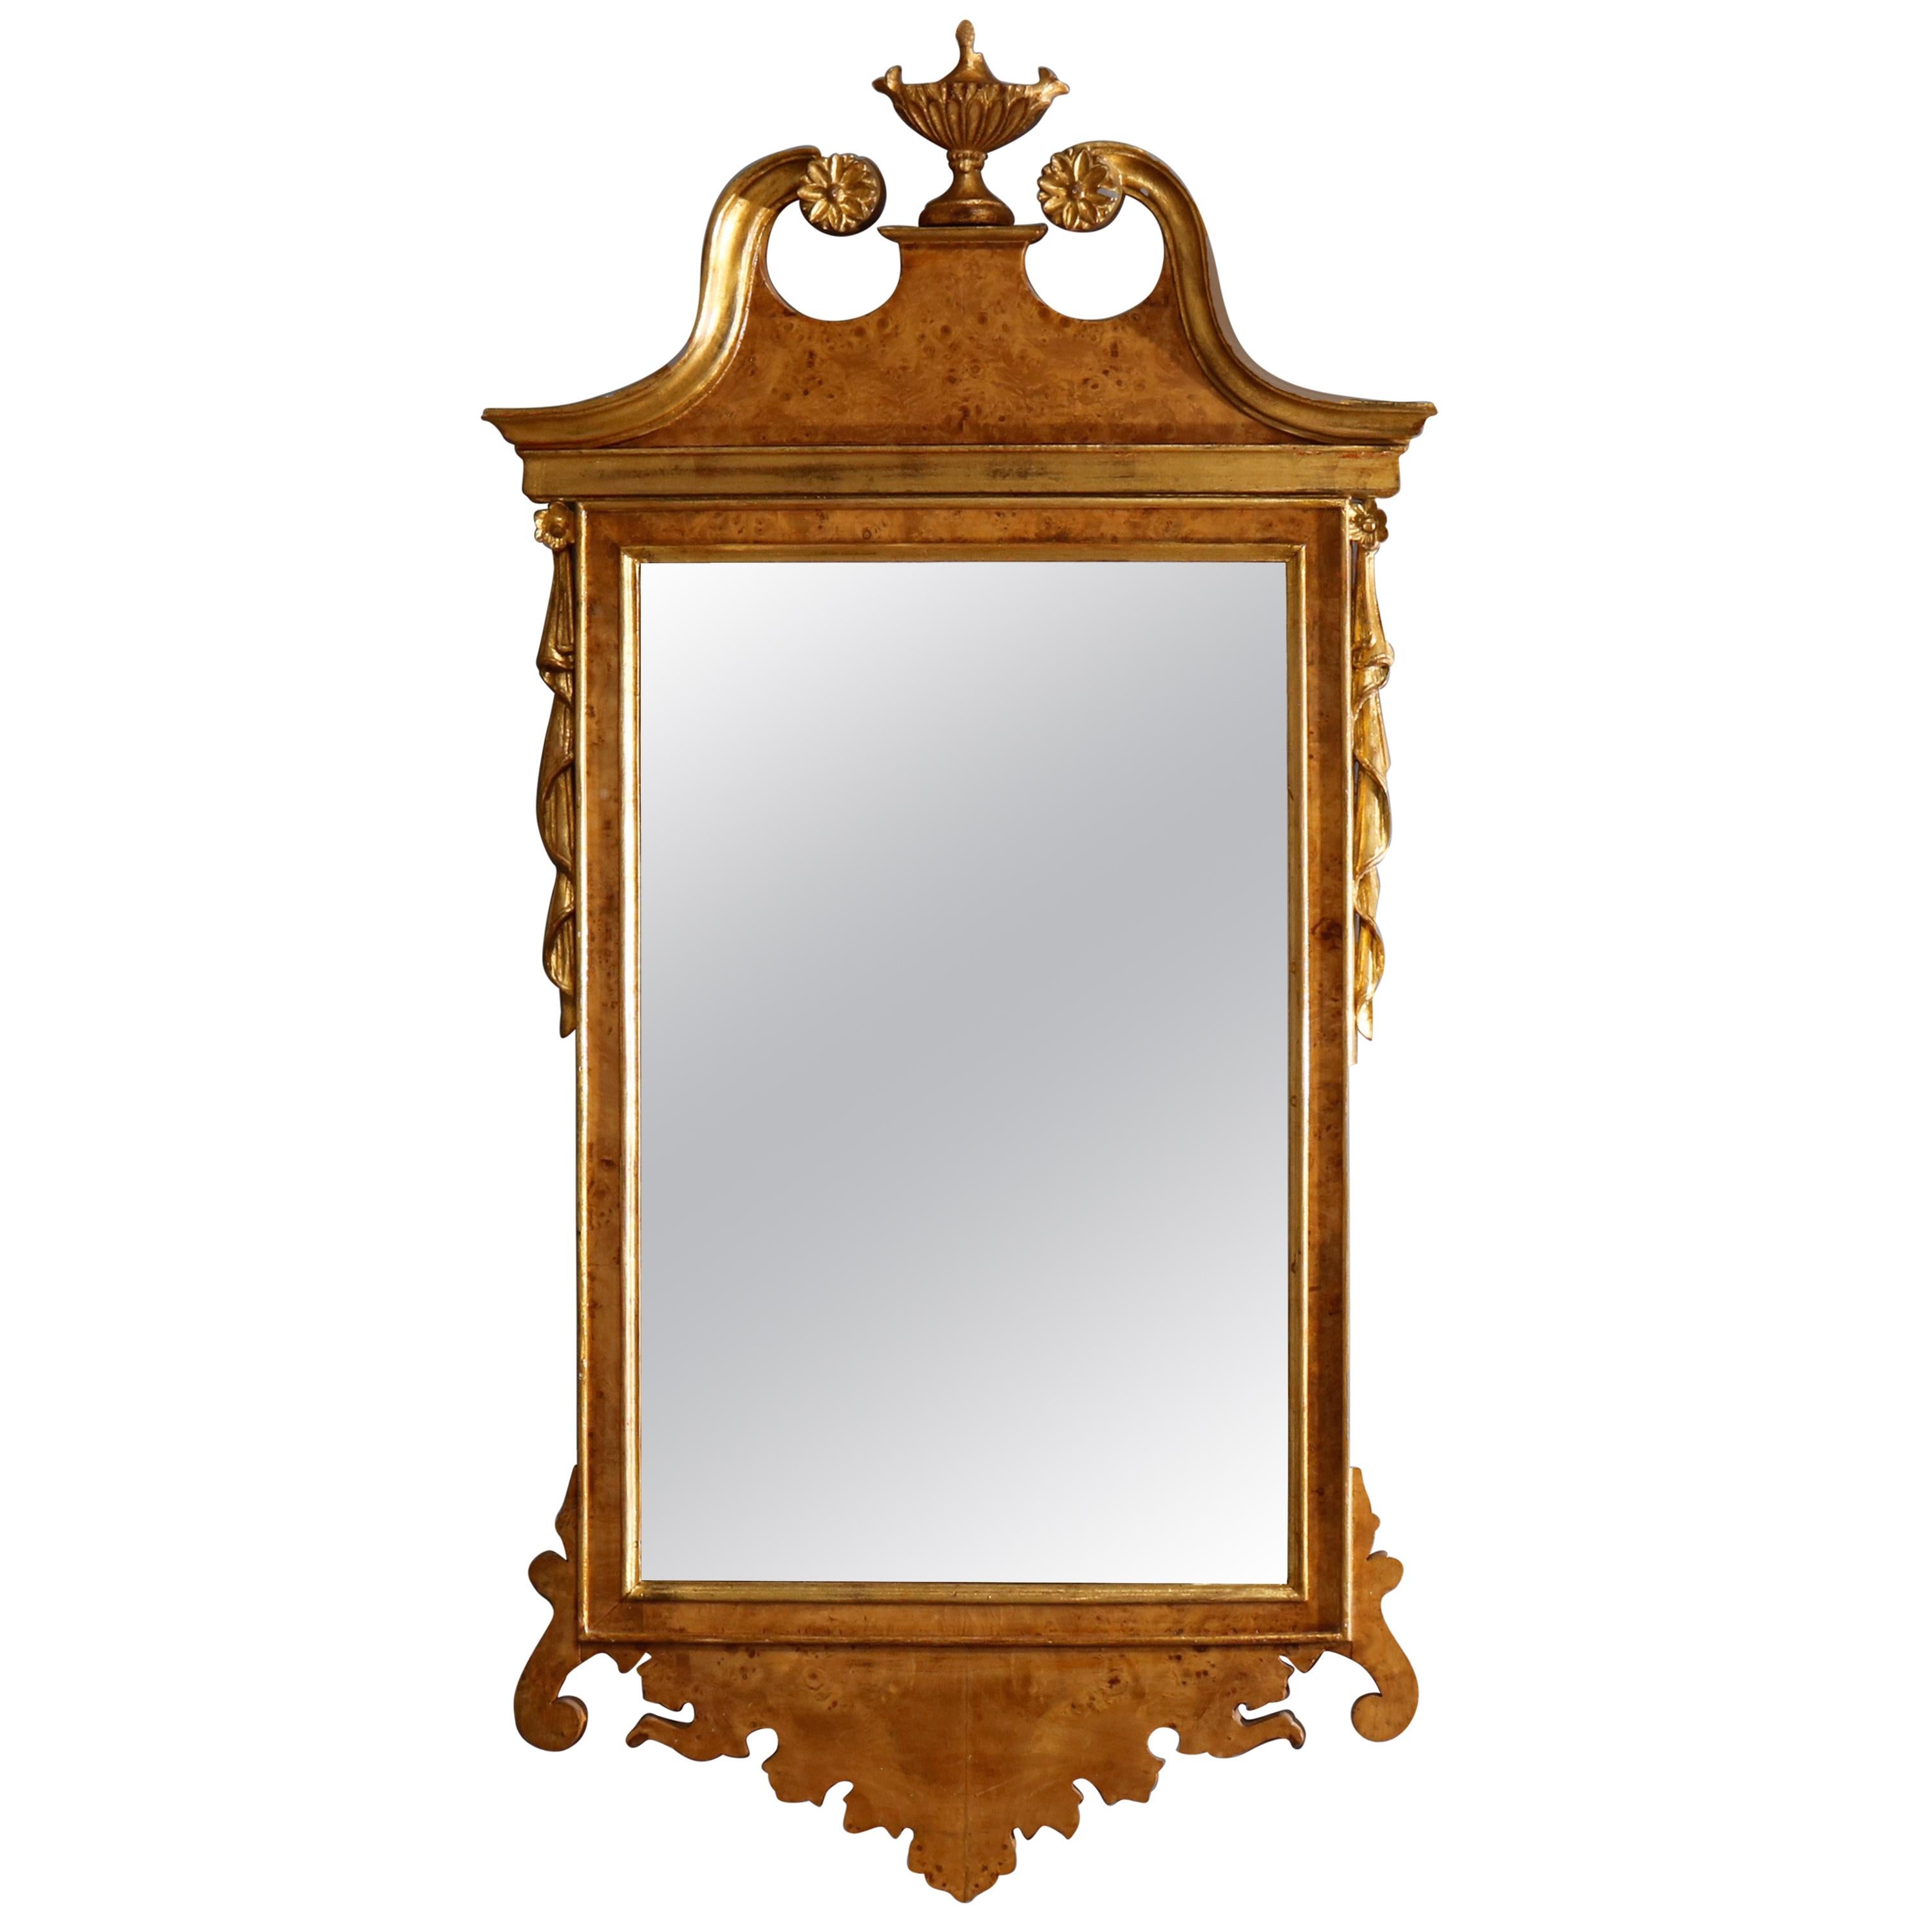 Vintage Chippendale Style Parcel-Gilt and Burl Walnut Wall Mirror, 20th Century